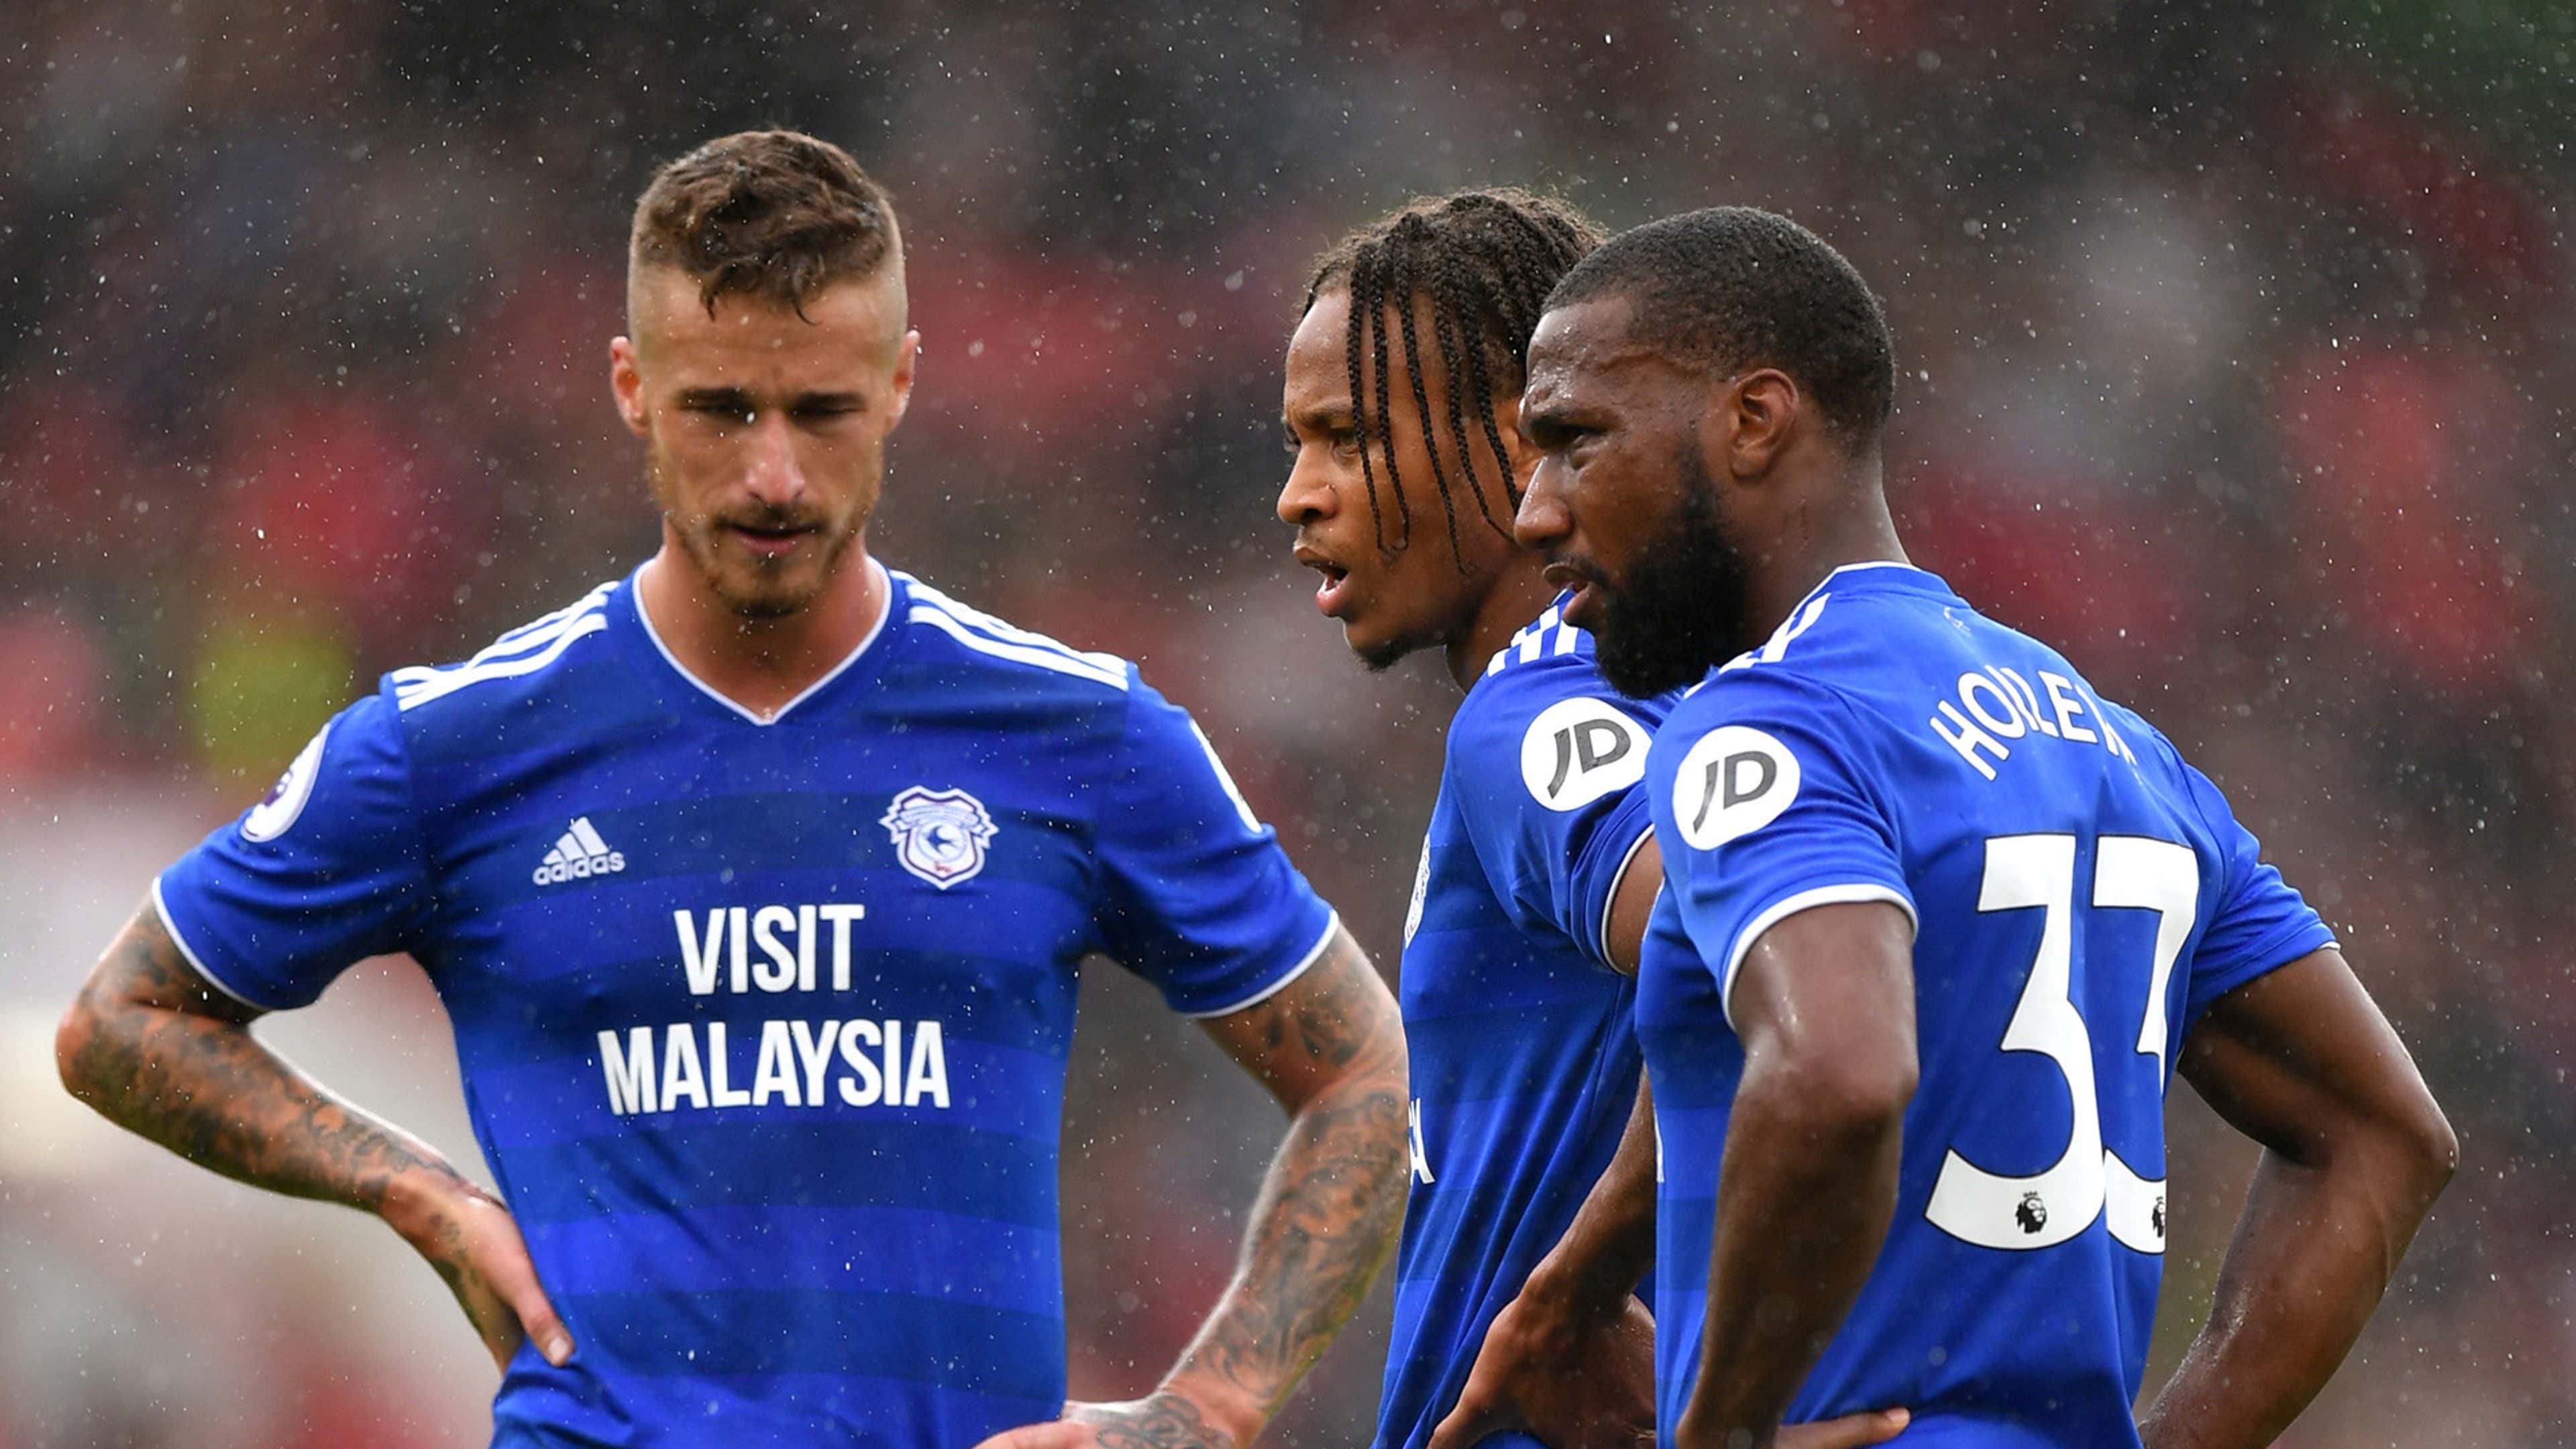 CARDIFF CITY FC: 2019/20 HOME FIXTURES, News